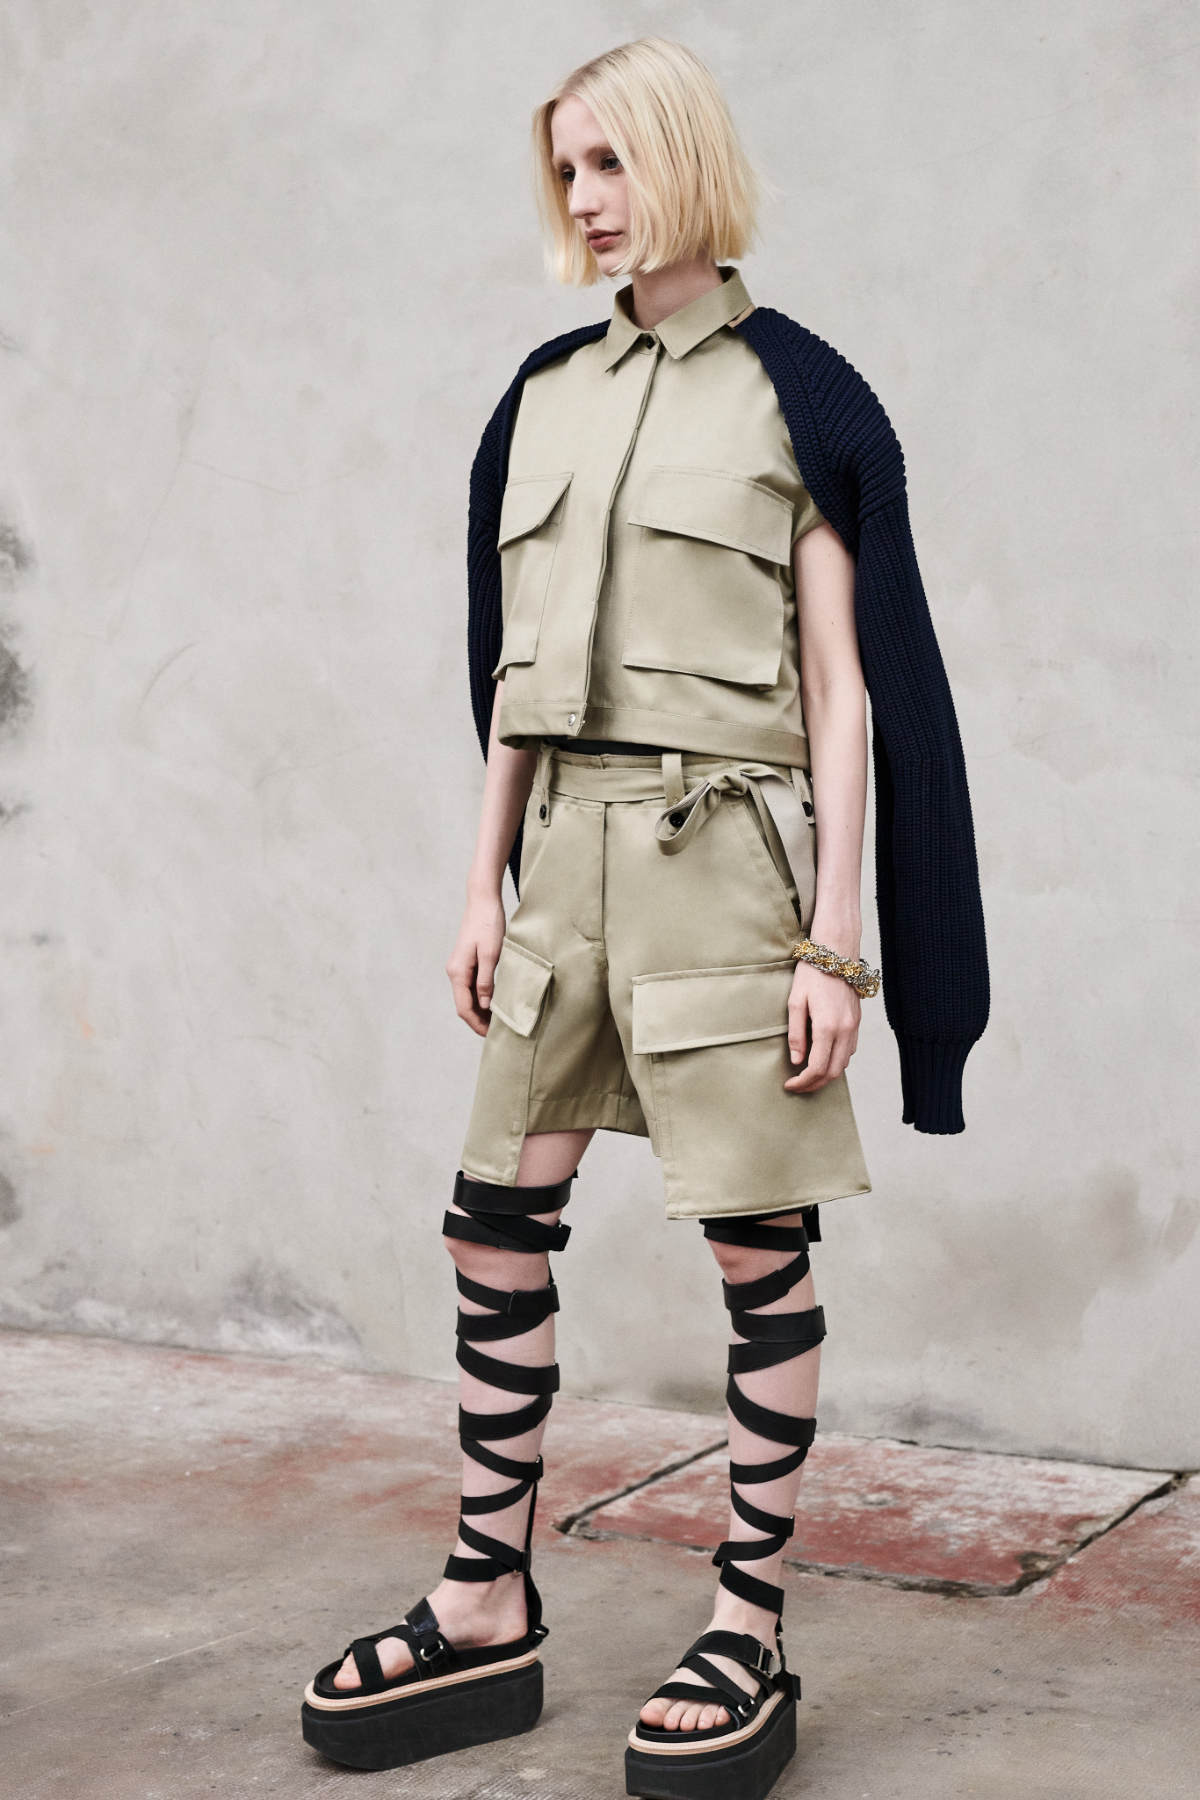 Sacai Presents Its New Spring 2023 Collection